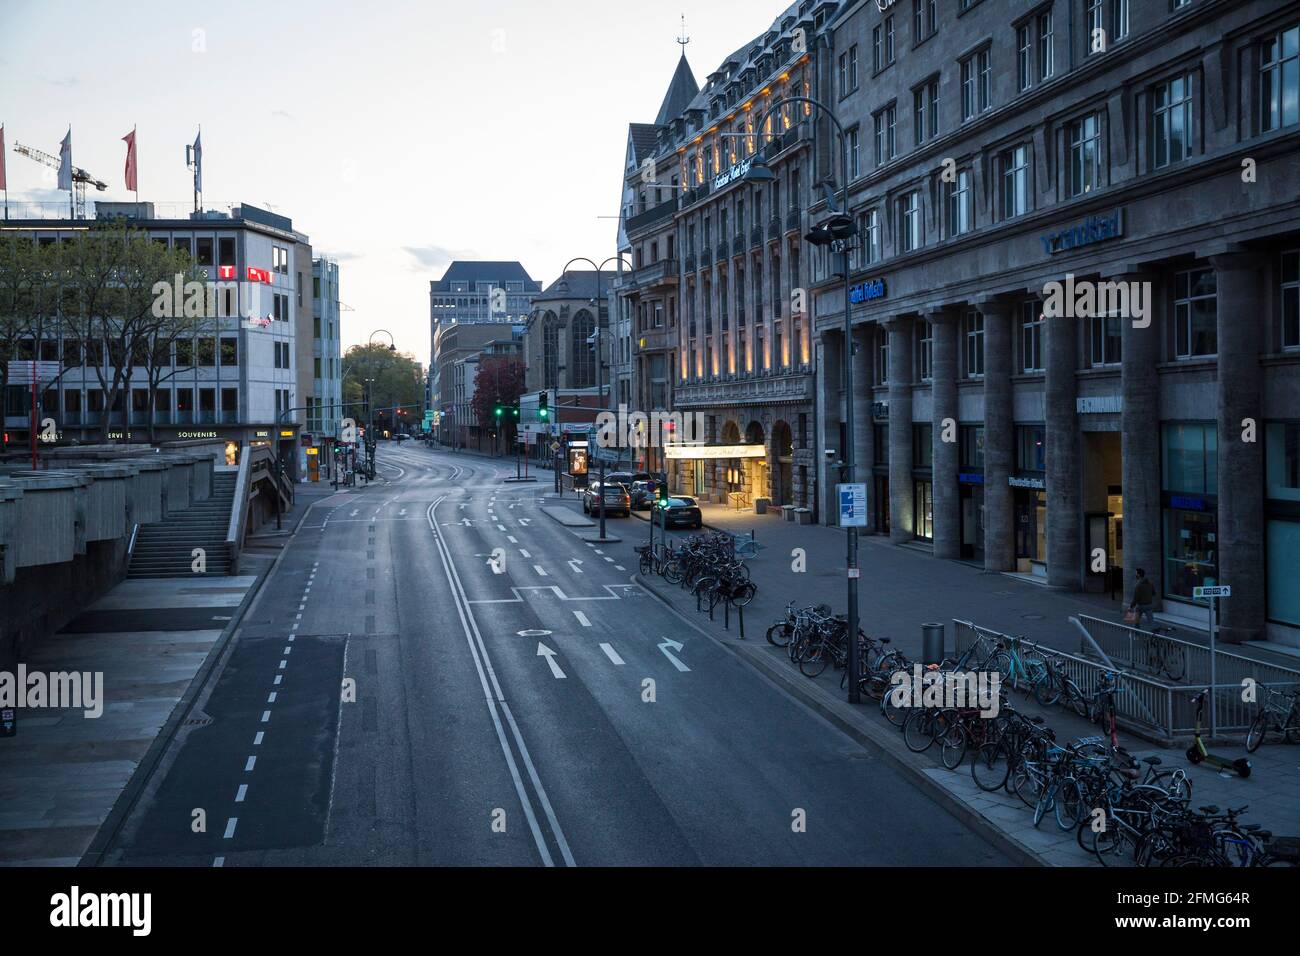 curfew from 9 pm during corona pandemic lockdown on May 5th. 2021. The deserted street Trankgasse near the cathedral, Cologne, Germany.  Ausgangssperr Stock Photo